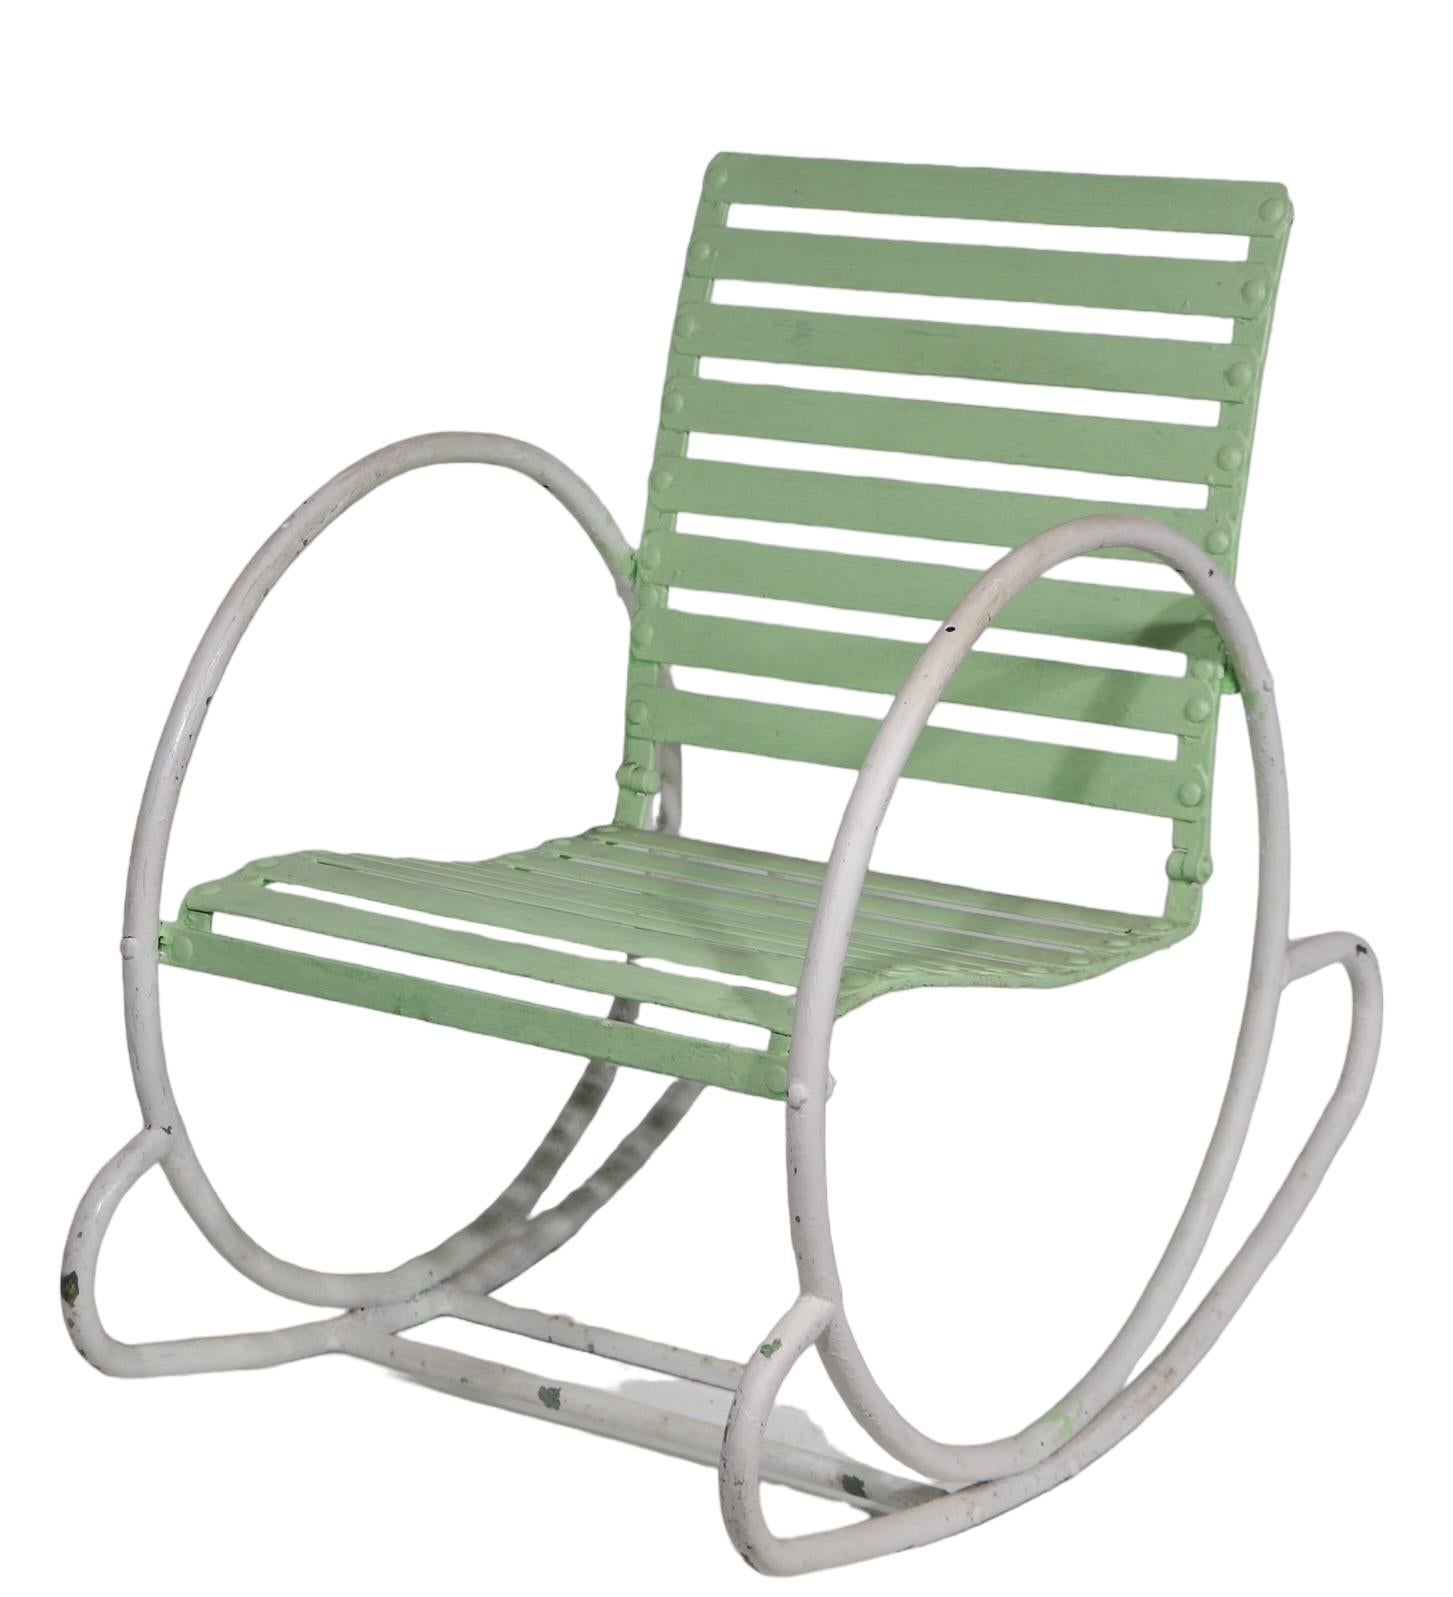 20th Century Art Deco Iron and Steel Garden Patio Poolside  Hoop Frame Rocking Chair c 1930's For Sale